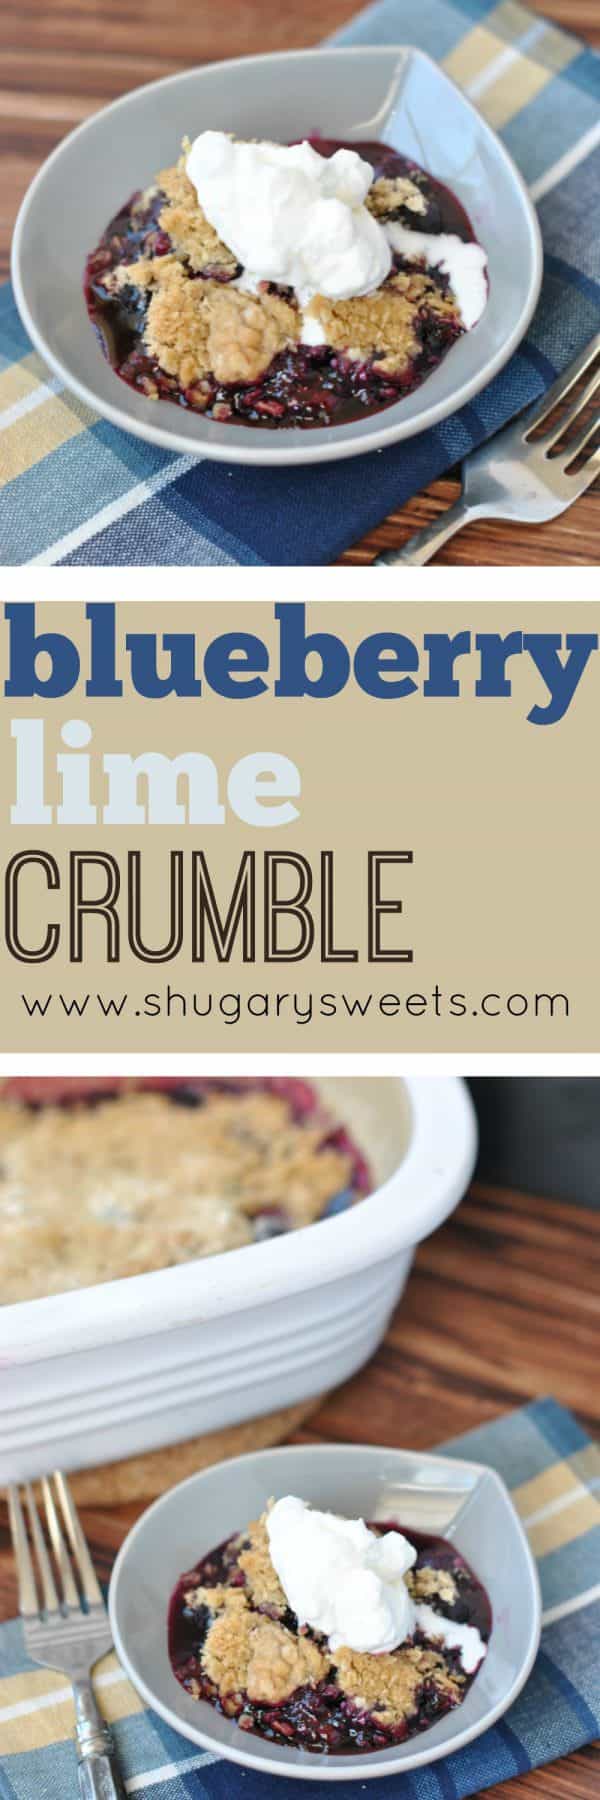 Blueberry Lime Crumble - Shugary Sweets